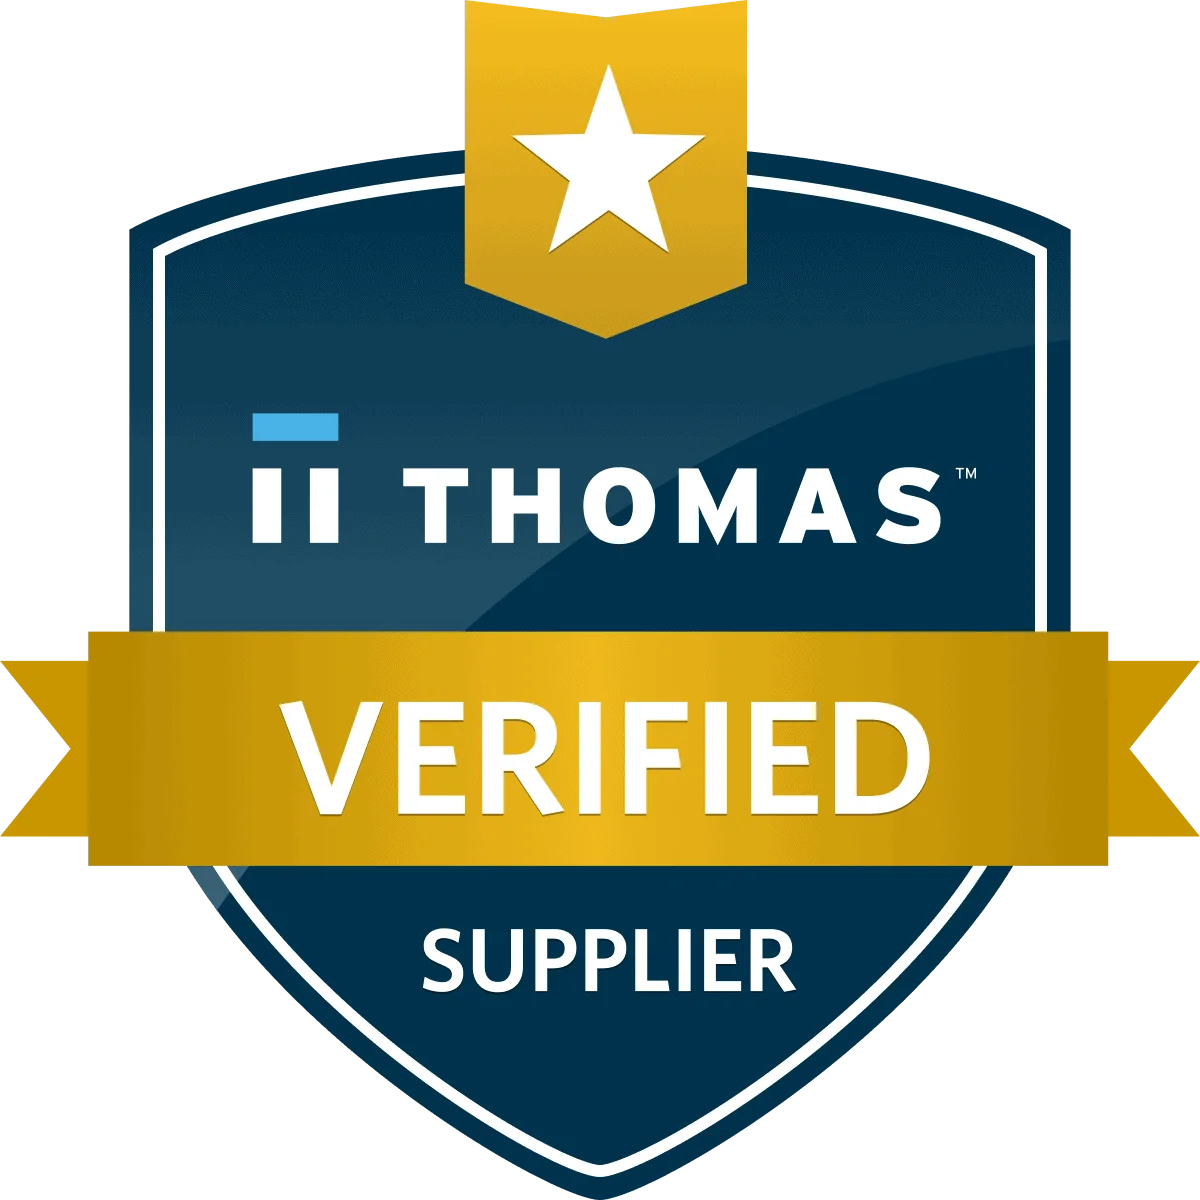 We are a verified supplier by ThomasNet